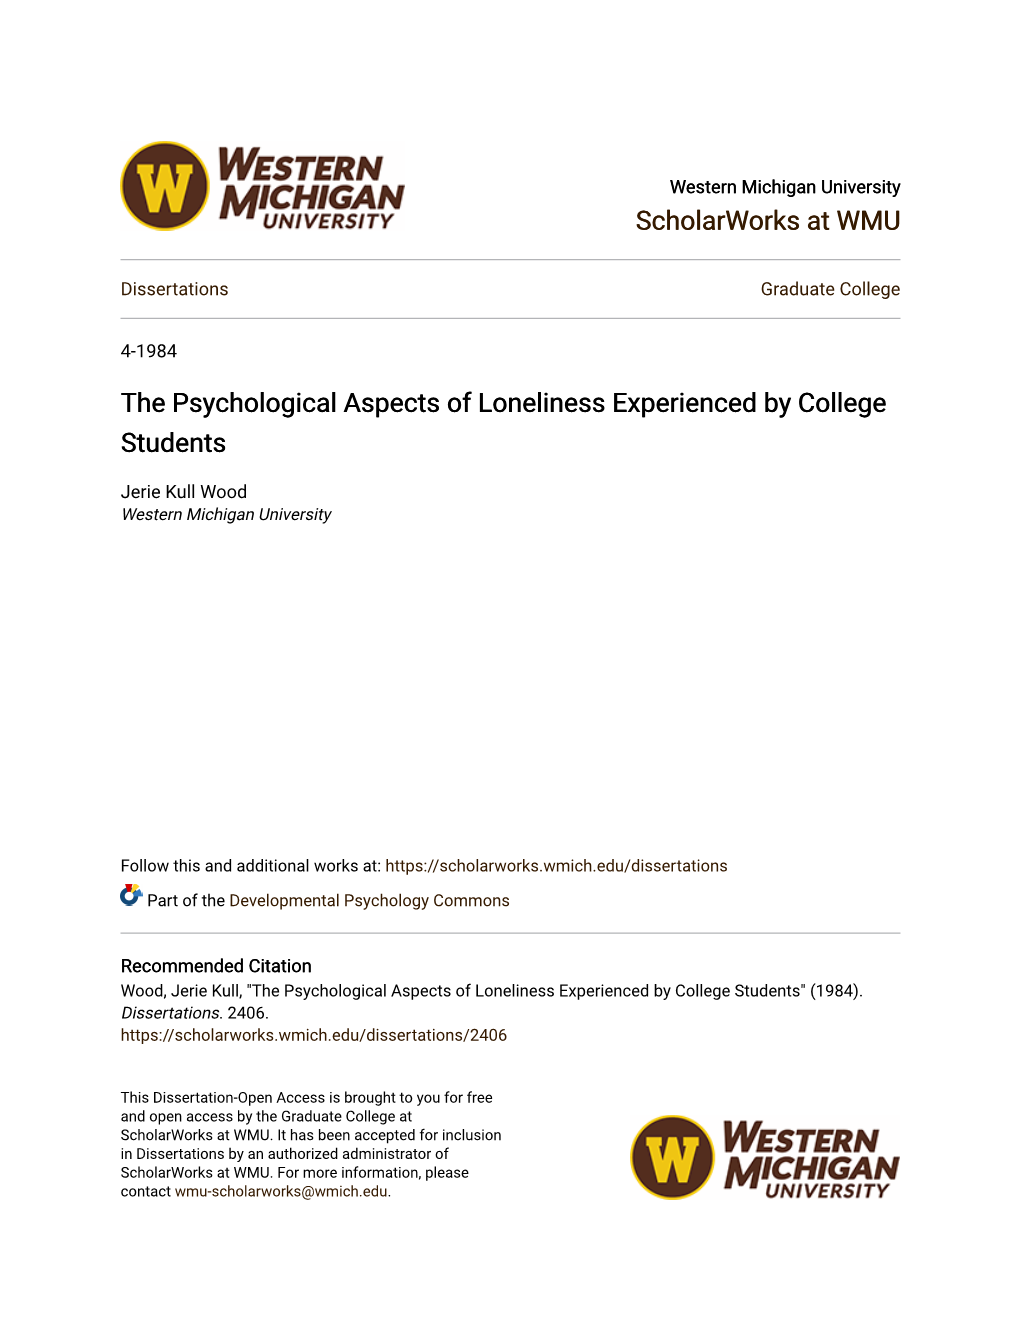 The Psychological Aspects of Loneliness Experienced by College Students